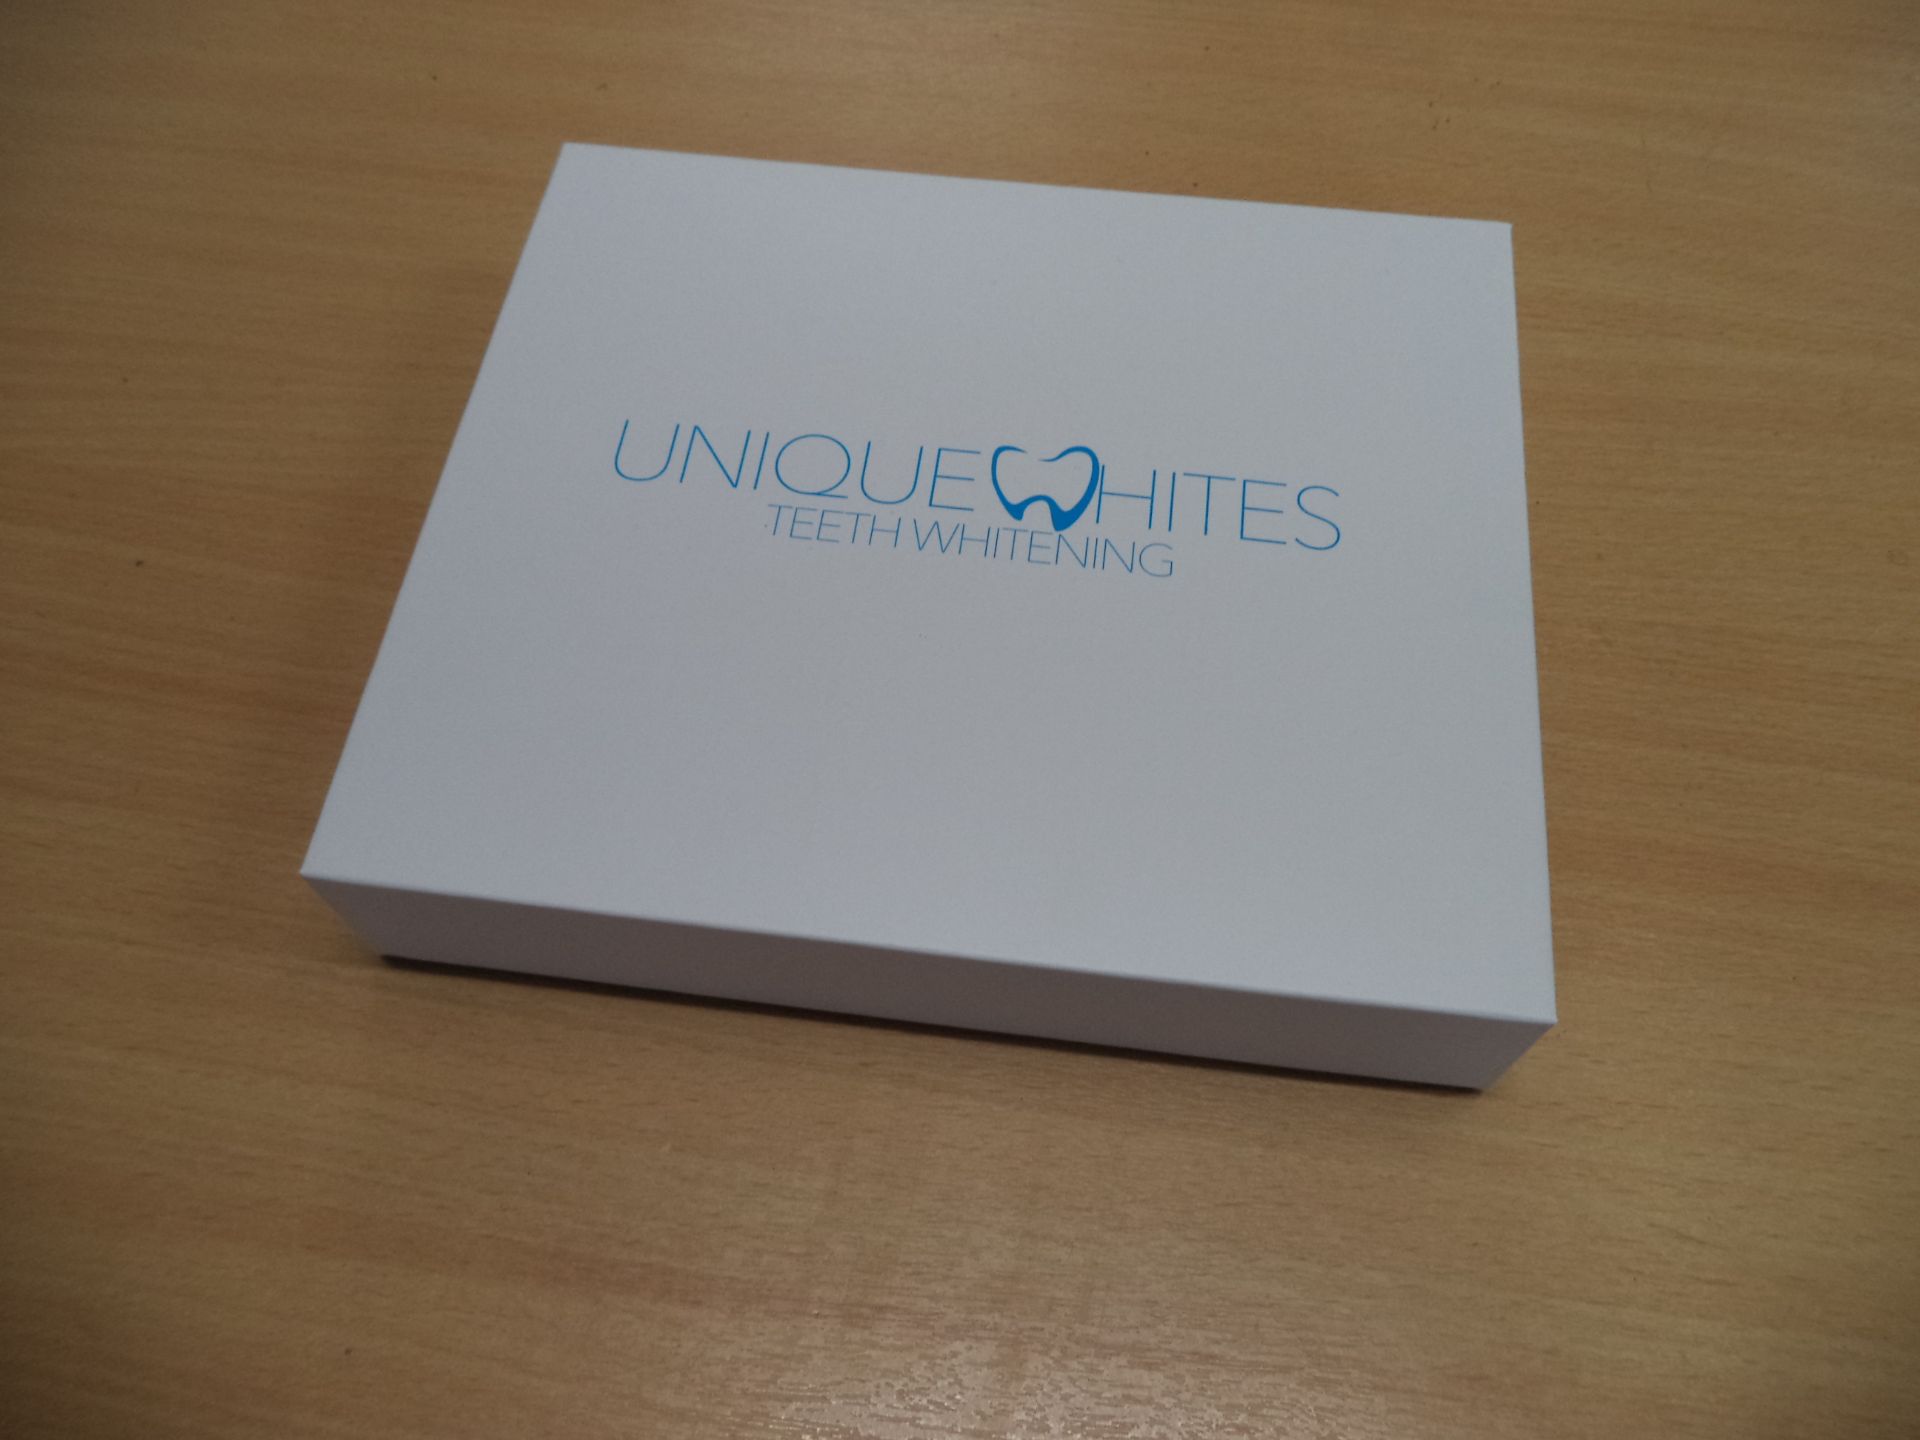 10 off Unique Whites teeth whitening kits, each in a retail display box with magnetic closing lid, - Image 3 of 8